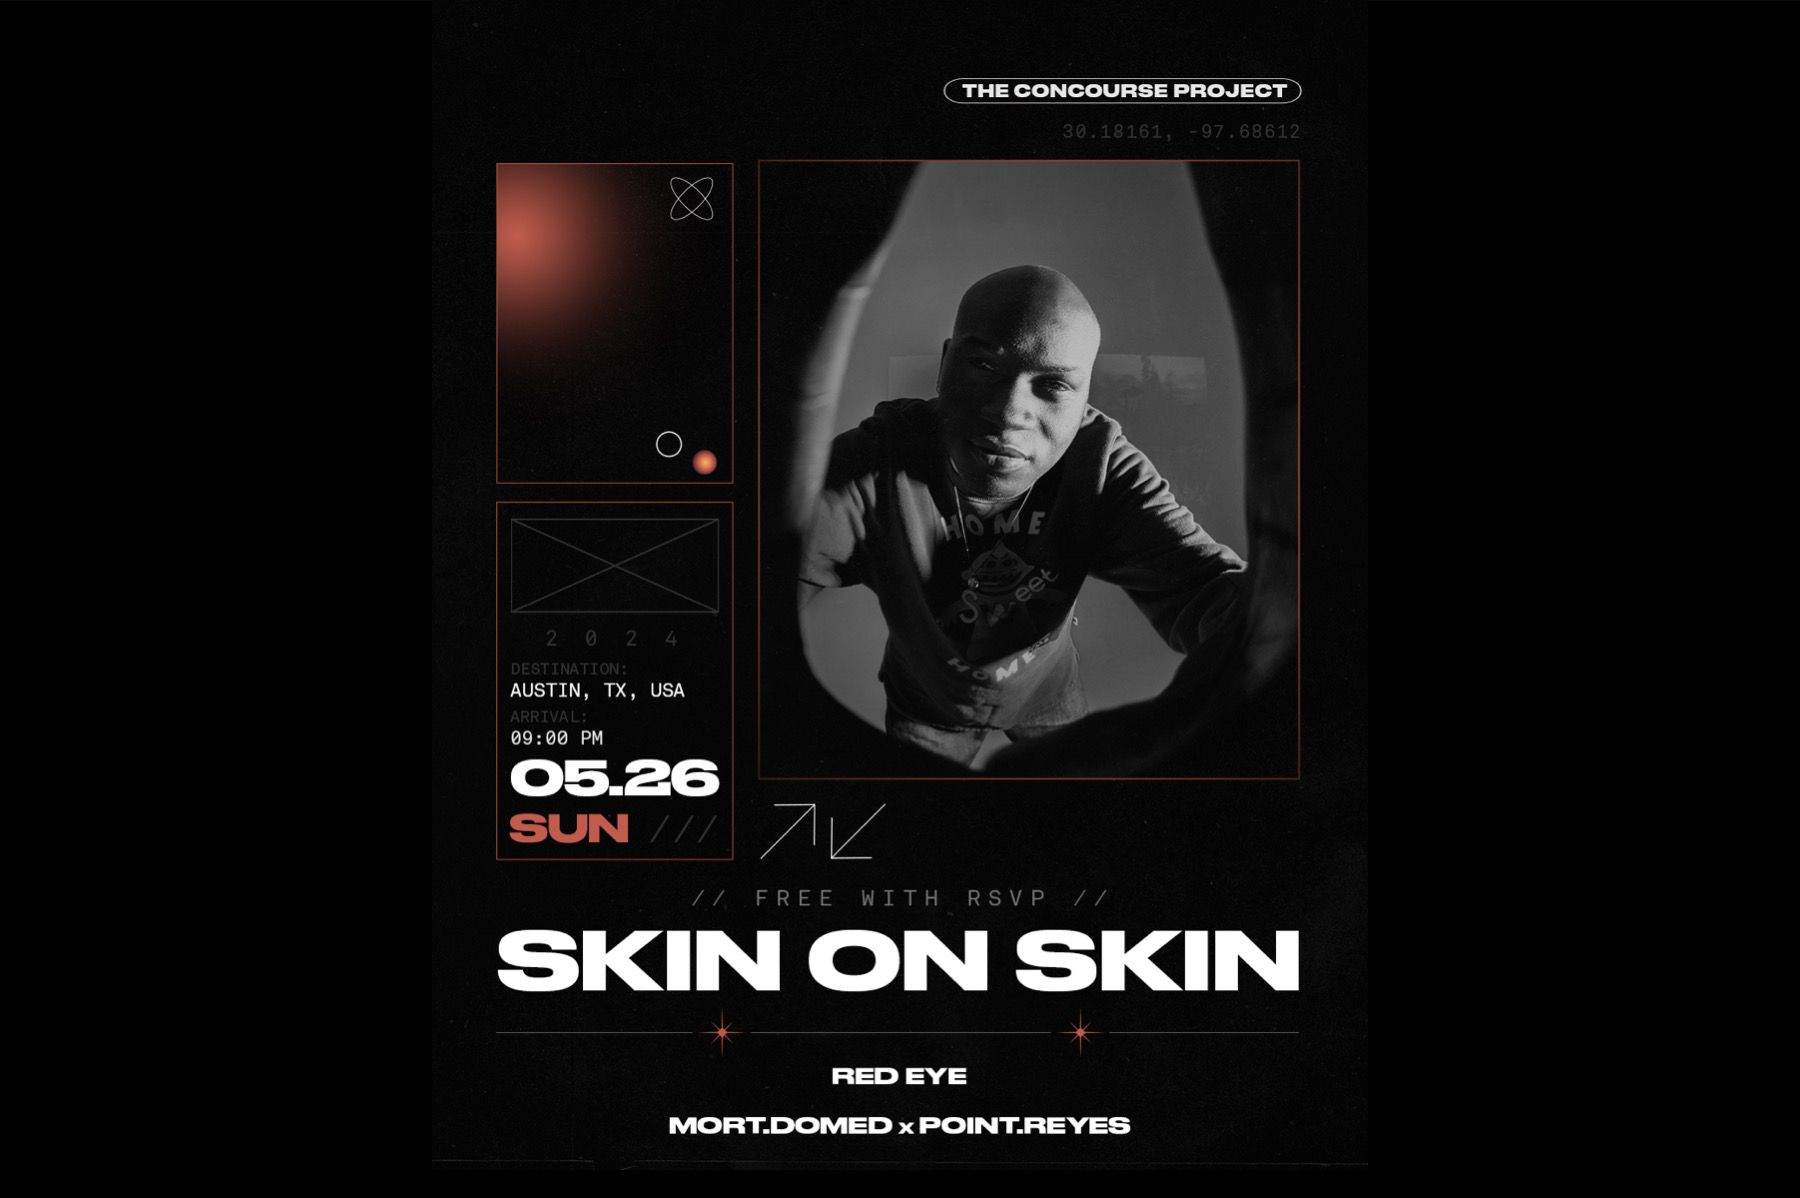 FREE WITH RSVP: Skin On Skin - フライヤー表